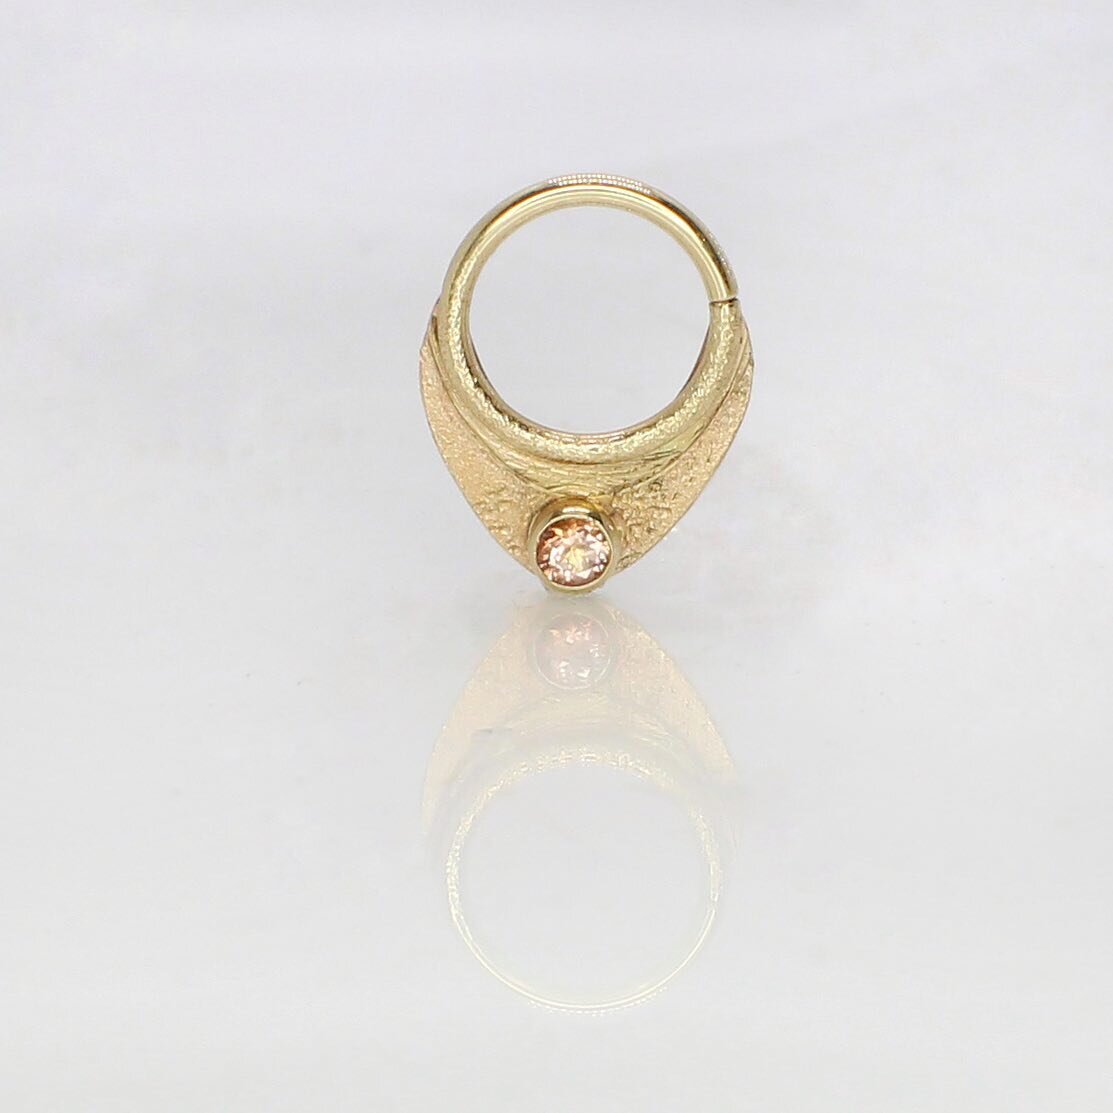 We have some big news coming&hellip;stay tuned! And in the meantime you&rsquo;ll want to start planing your next piercing project (trust us). Maybe with this handmade, one of a kind shield with peach topaz, perfect for a septum.
.
.
#handmadejewelry
